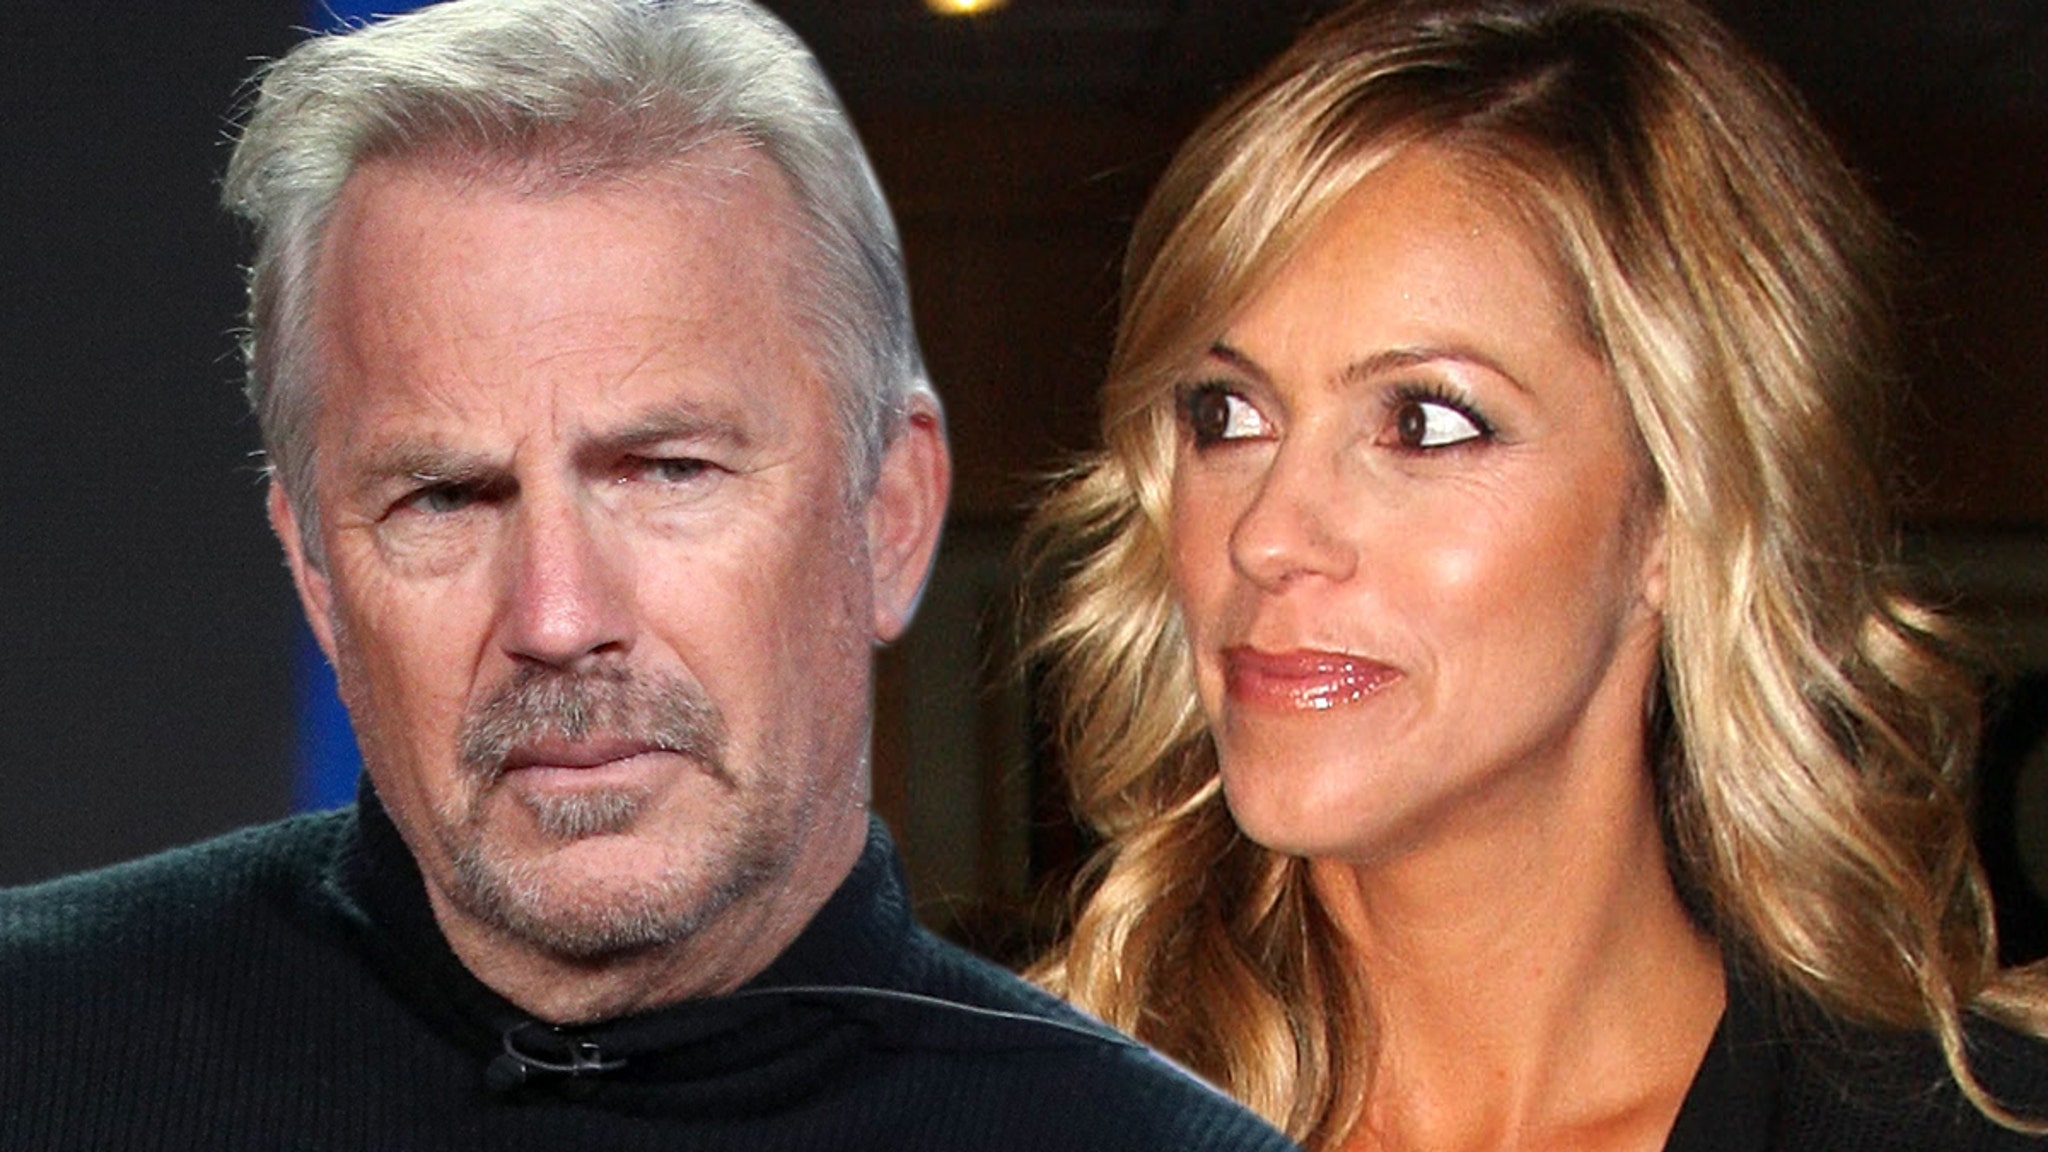 Kevin Costner and Jewel Dating, Cozy Photos on Caribbean Vacay